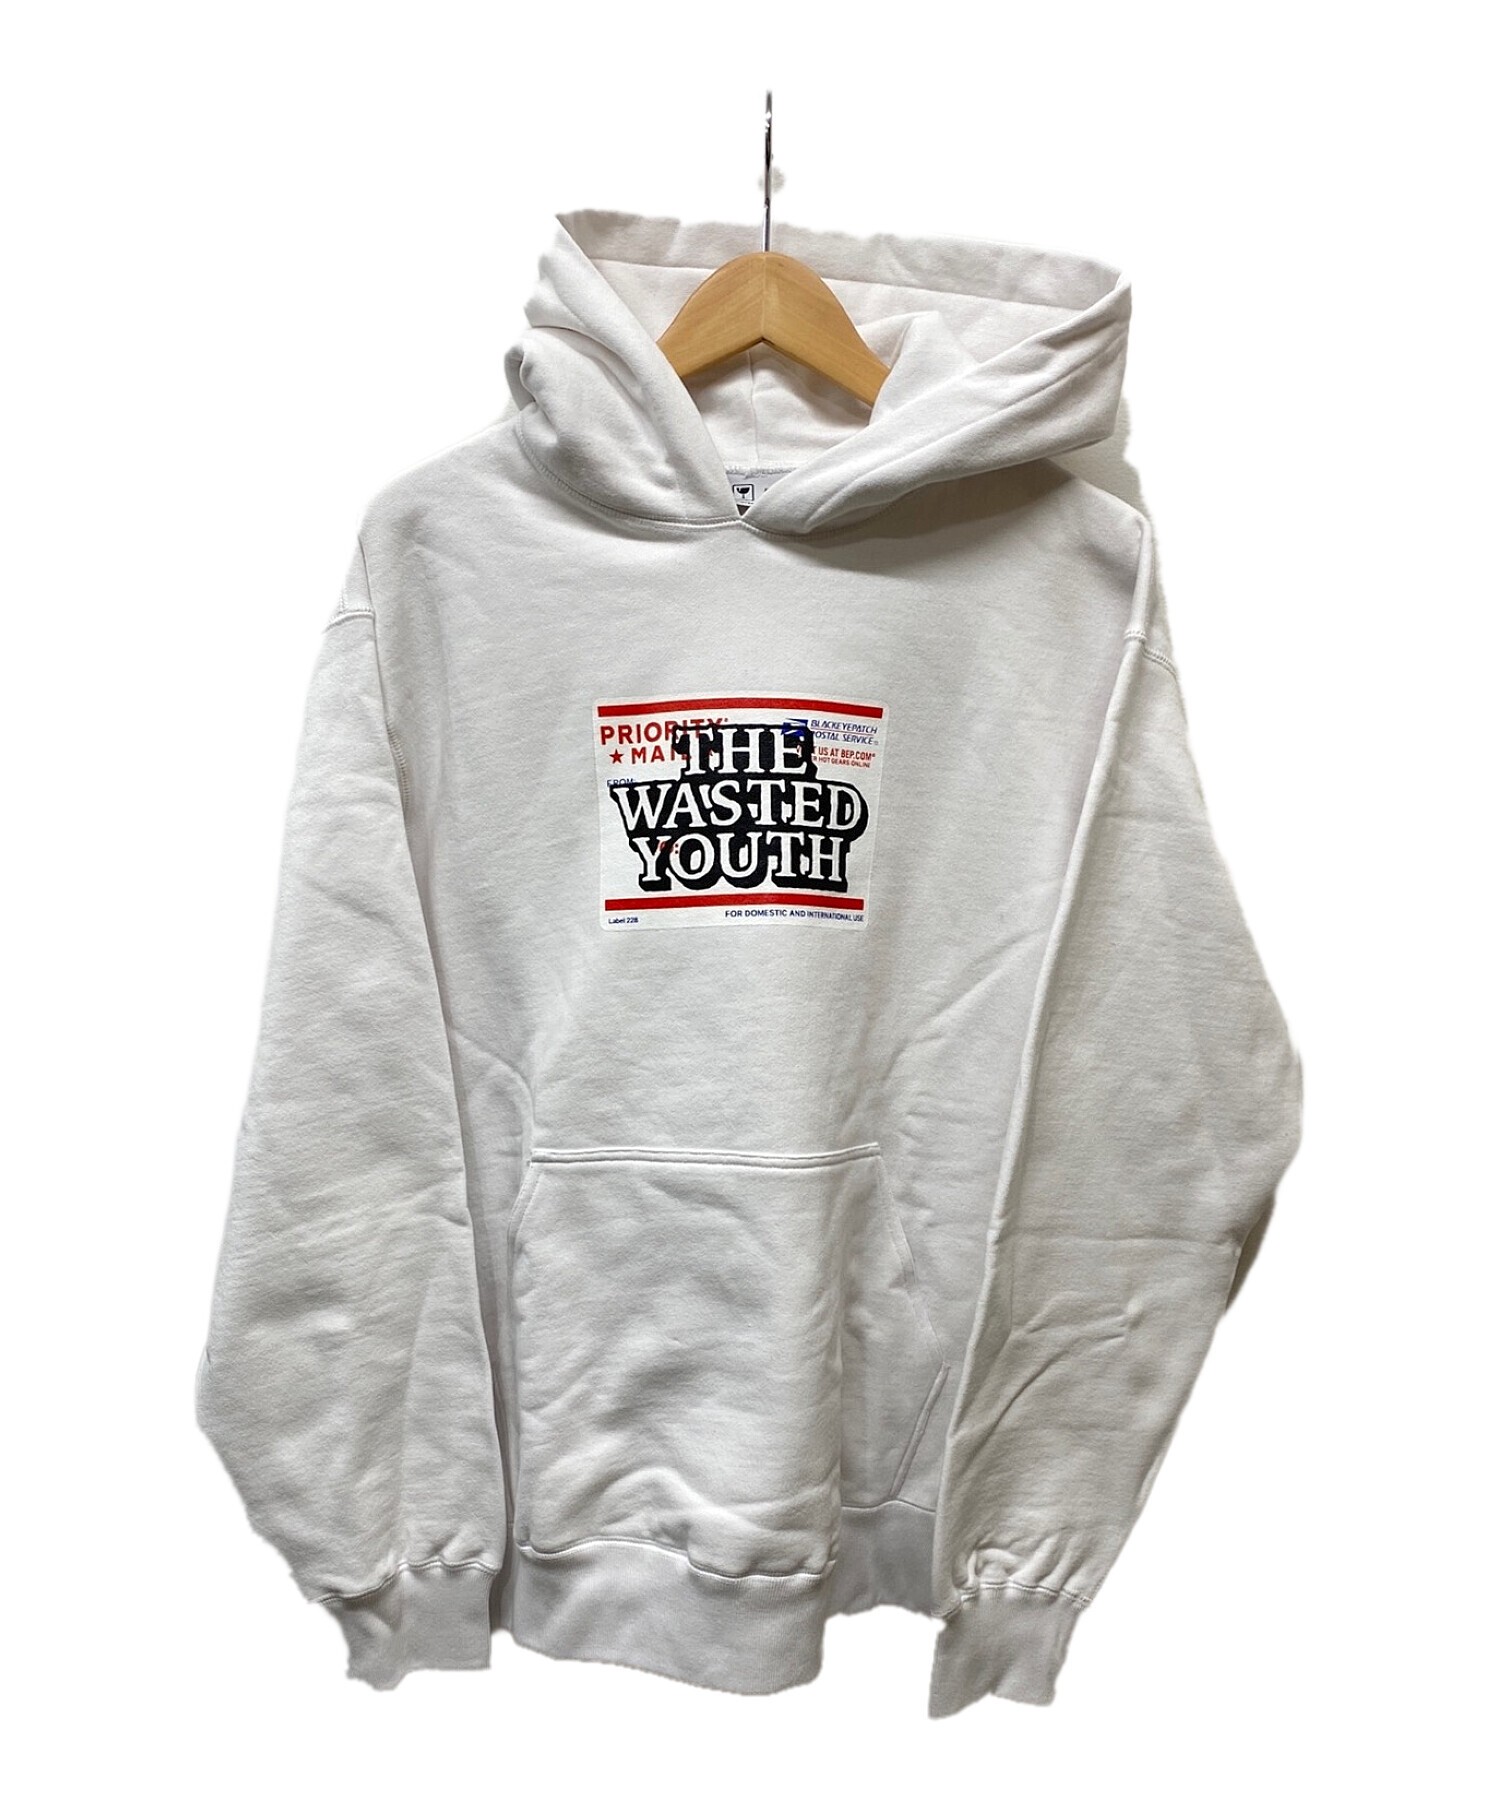 black eye patch wasted youth hoodie